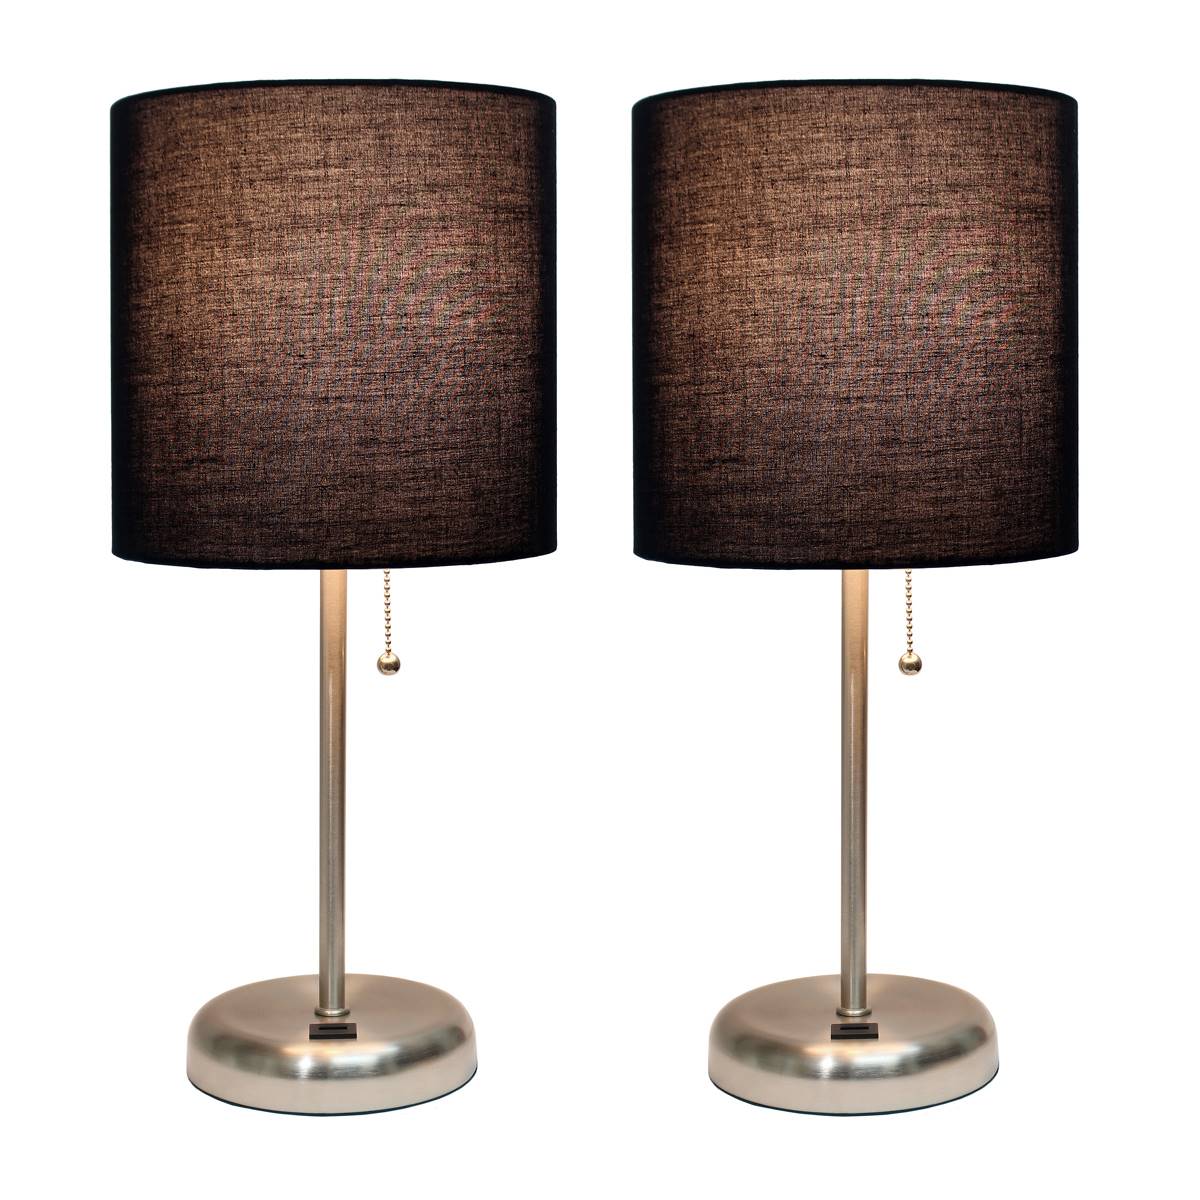 LimeLights Brushed Steel Lamp W/USB Port/Fabric Shade-Set Of 2